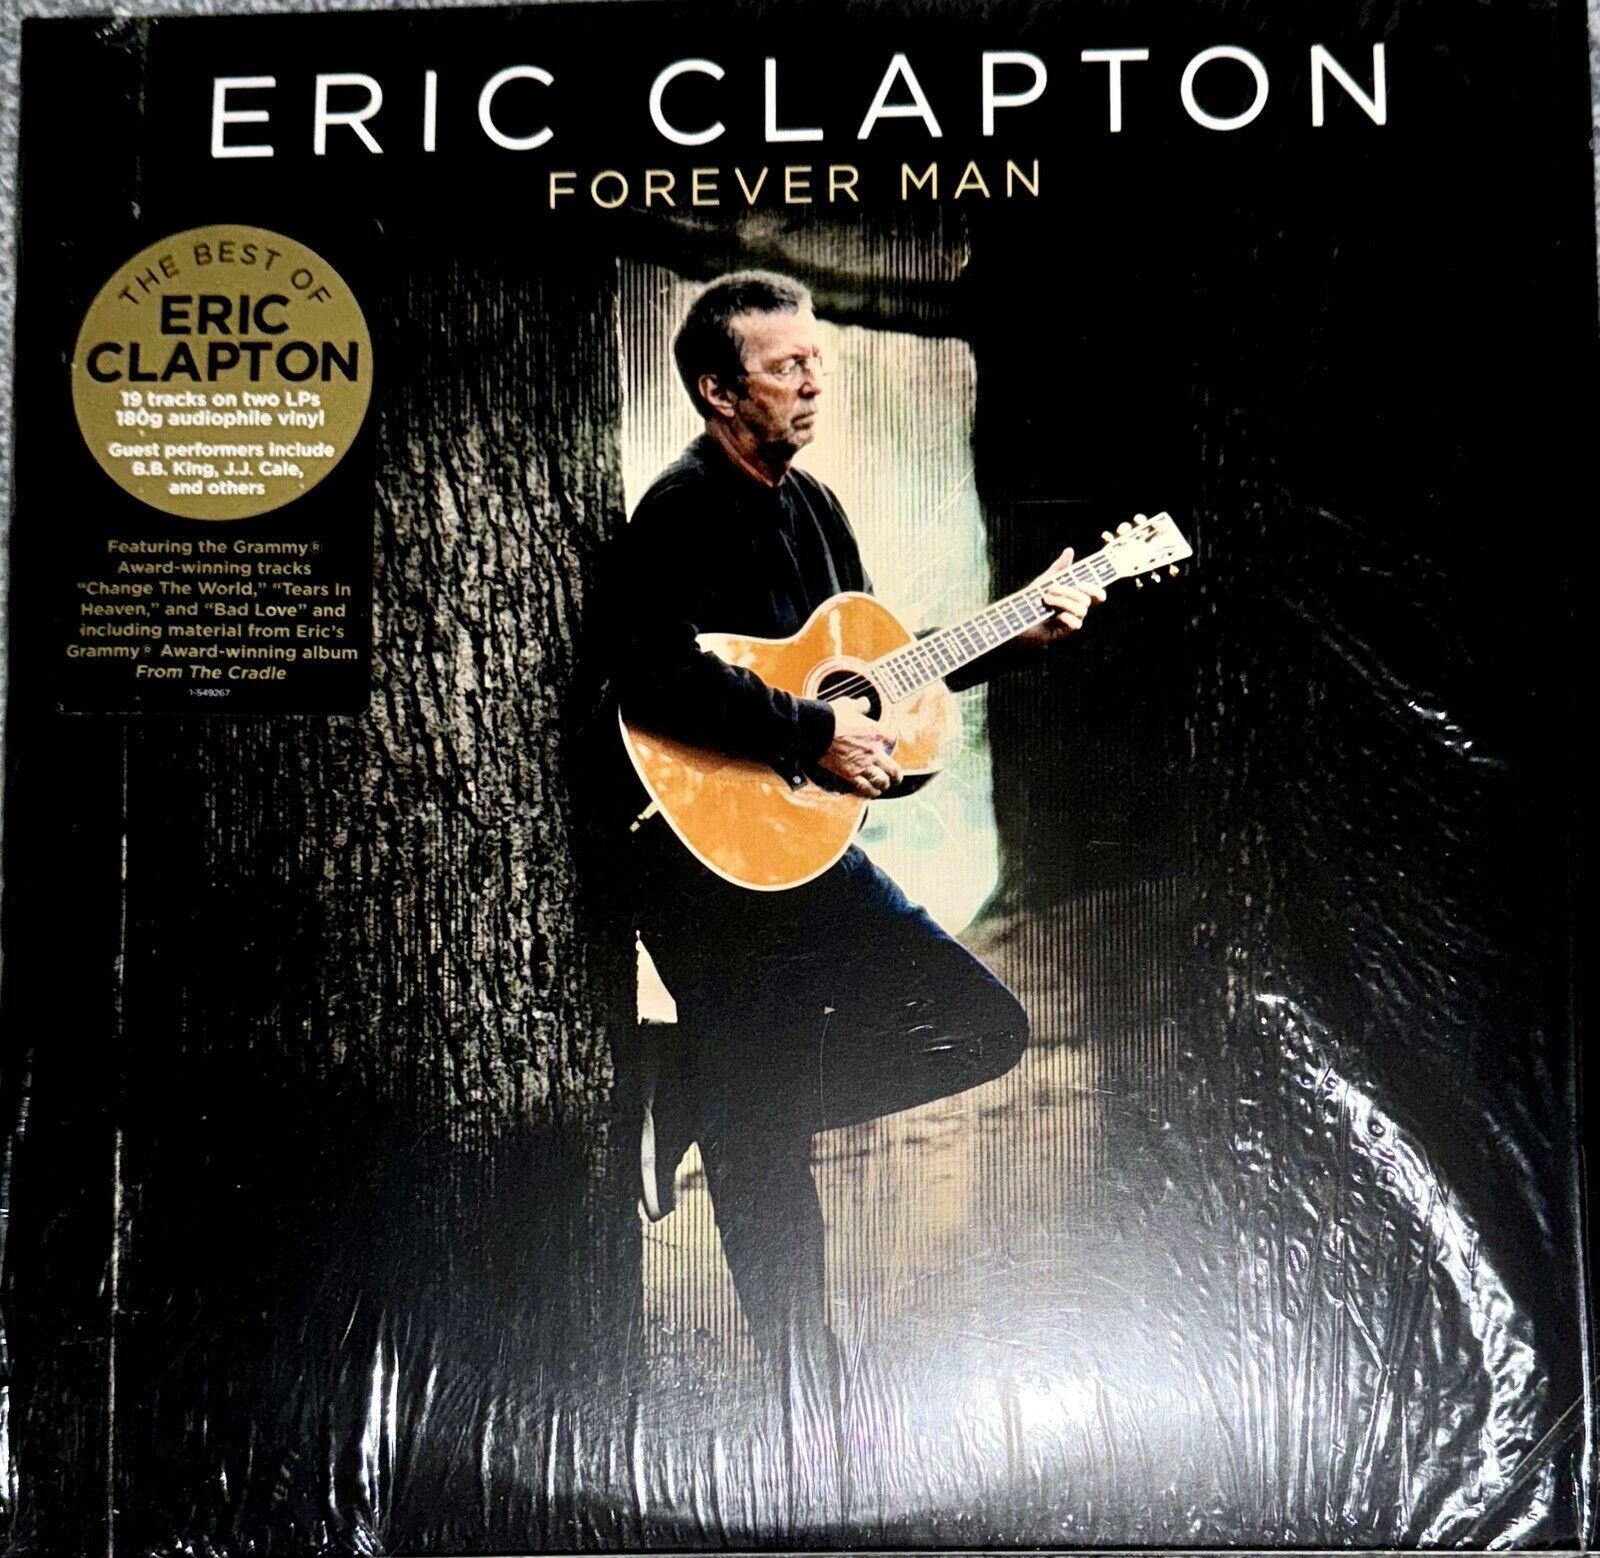 Forever Man by Eric Clapton (Record, 2015) Very Rare and High Quality Sound 2LP